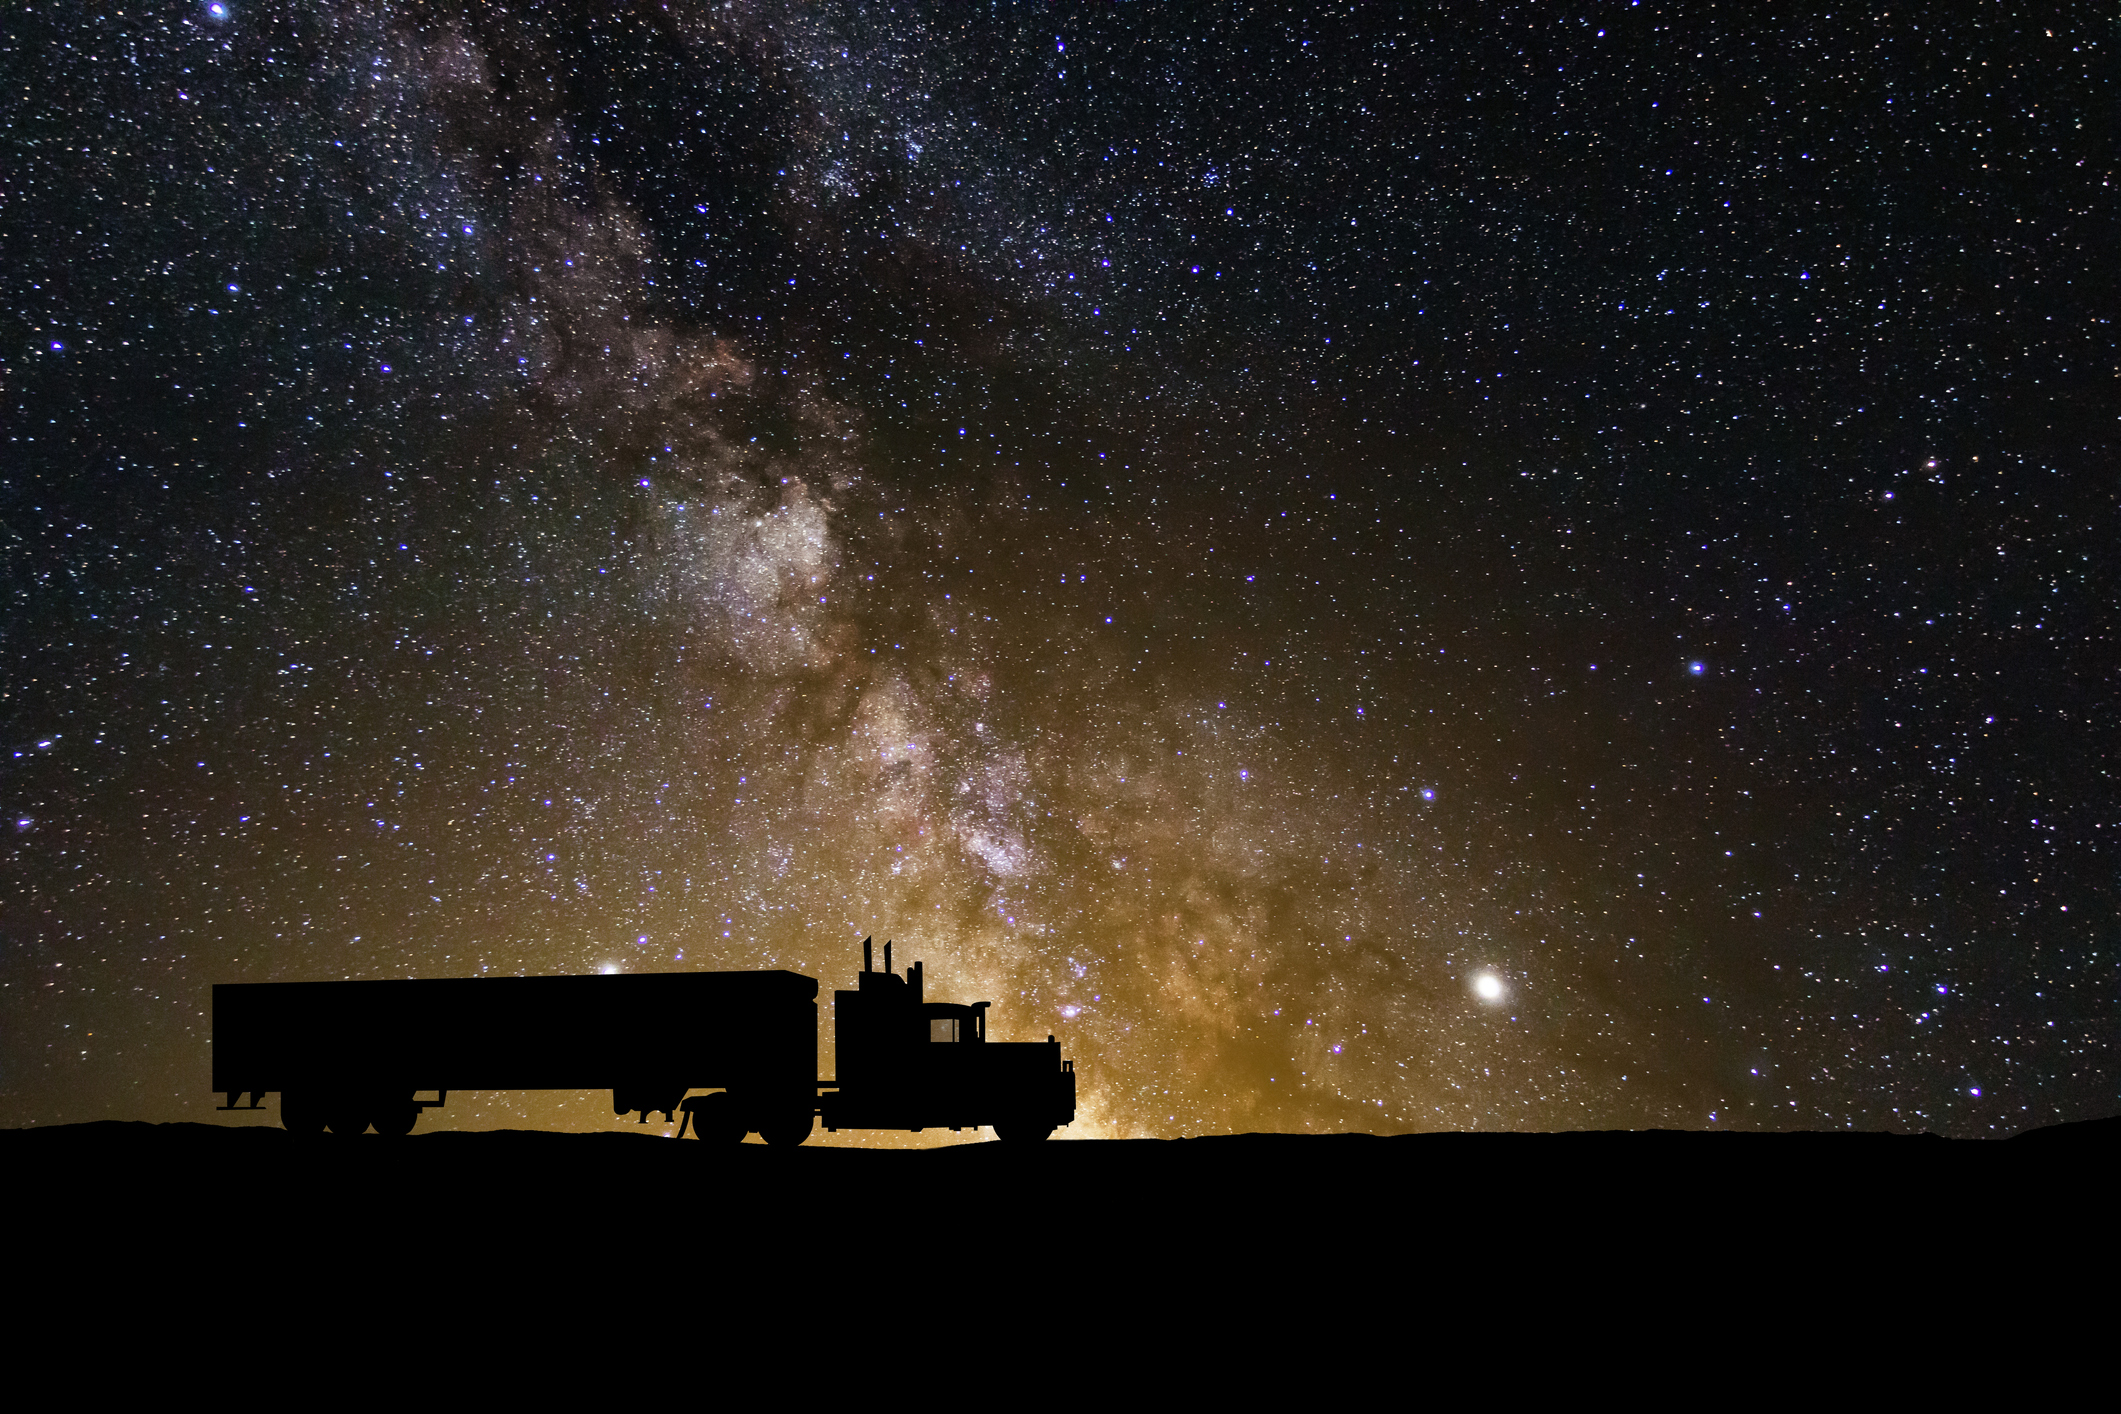 a silhouette of a semi truck in front of a starry sky